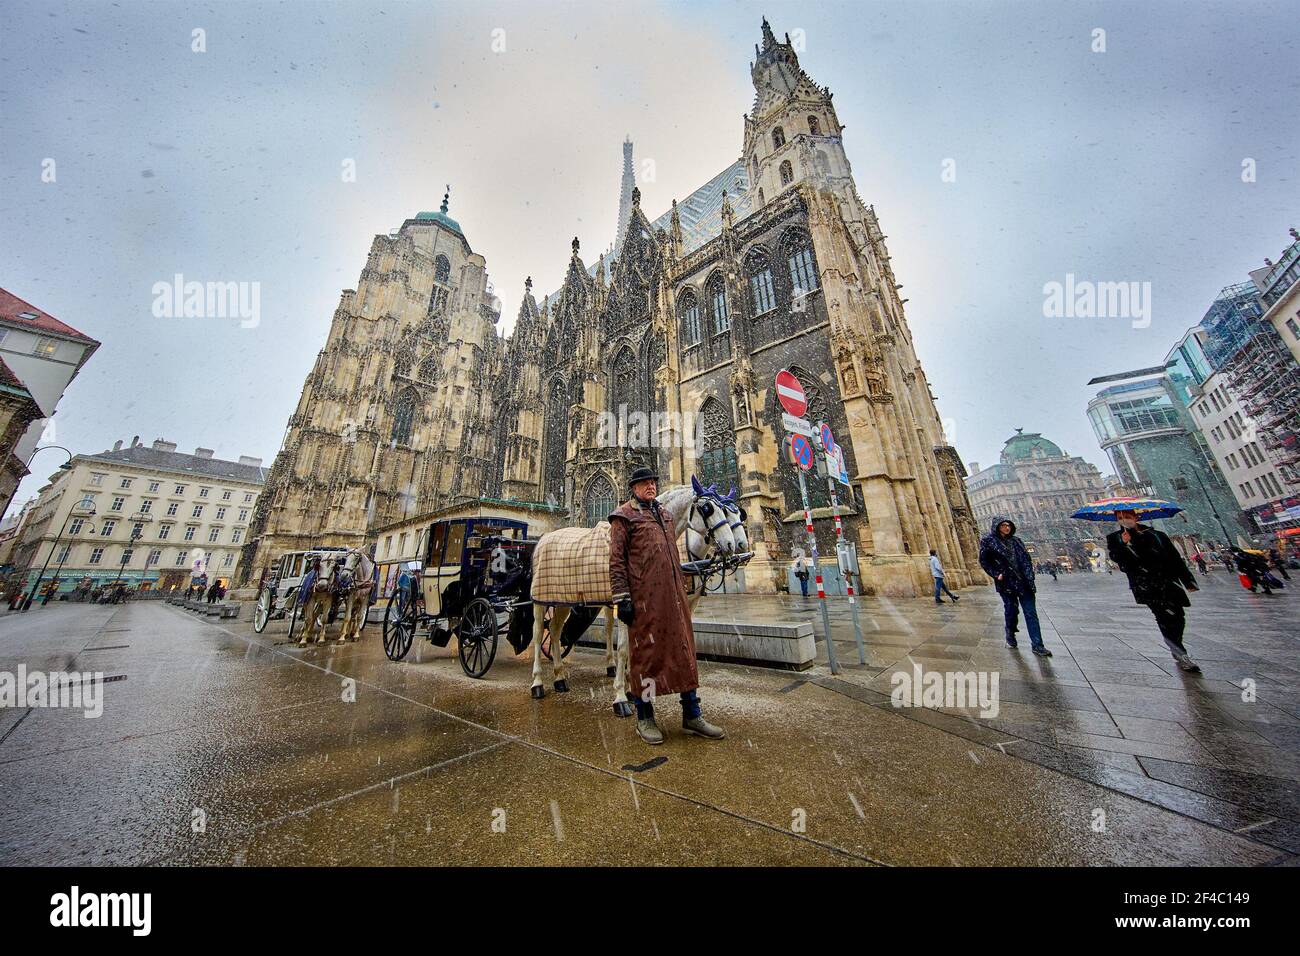 (210320) -- VIENNA, March 20, 2021 (Xinhua) -- Fiaker horse carriages are seen at the Stephansplatz square in Vienna, Austria, March 19, 2021. Viennese Fiaker coachmen have set up a feed box in the city center, where animal lovers can donate fruit and vegetables for the horses. As one of the most famous tourism projects of Vienna, Fiaker horse carriages encountered operational difficulties during the COVID-19 pandemic. (Photo by Georges Schneider/Xinhua) Stock Photo